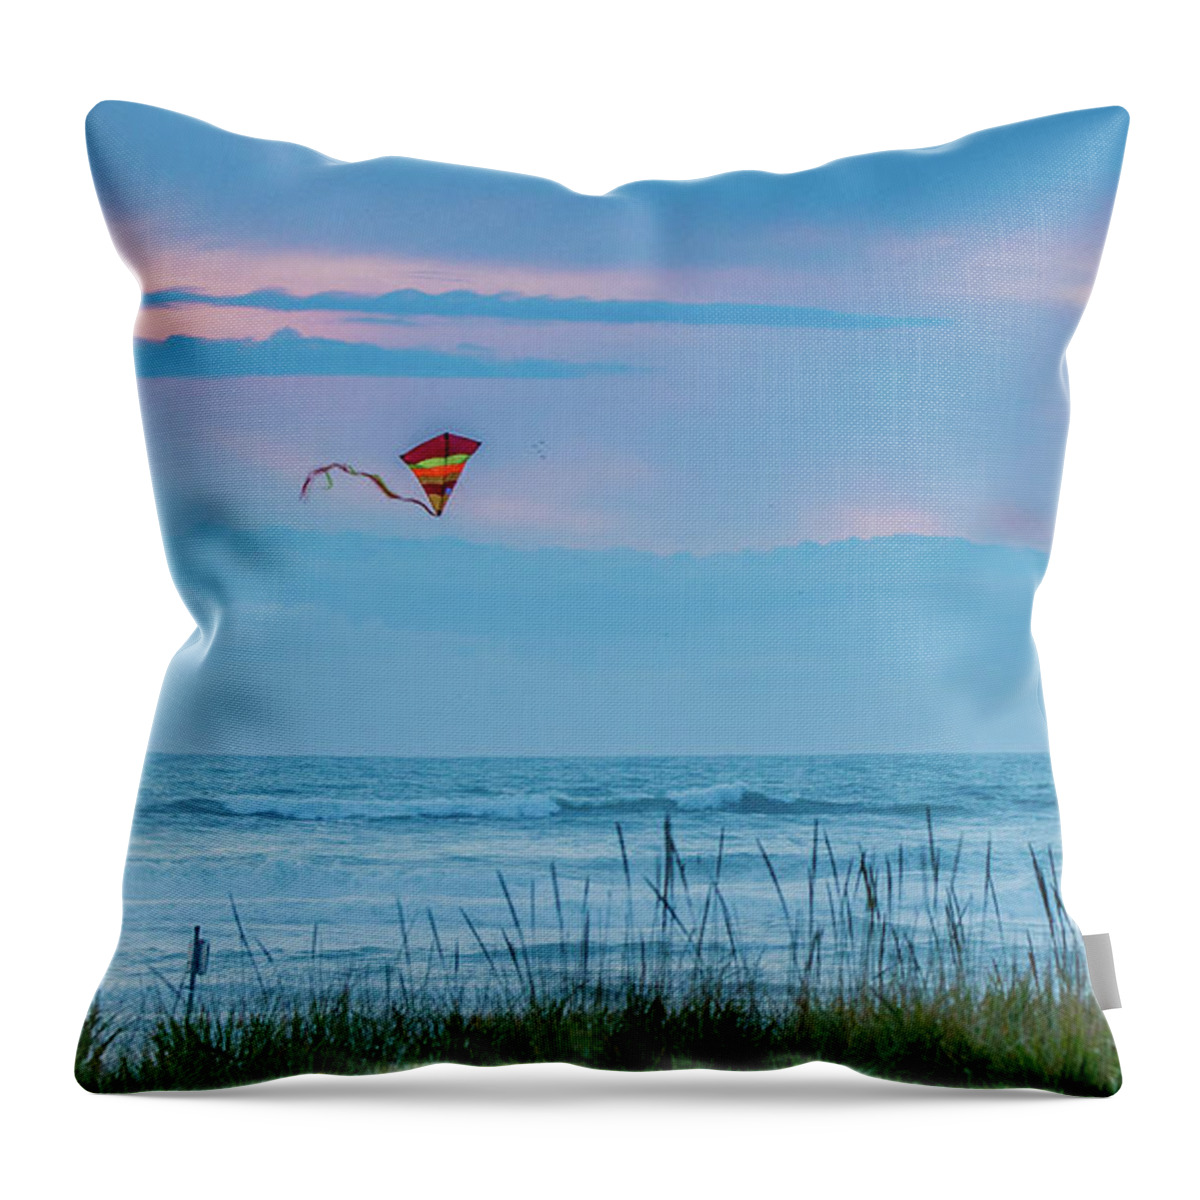 Sunset Throw Pillow featuring the photograph Kite in the Air at Sunset by E Faithe Lester